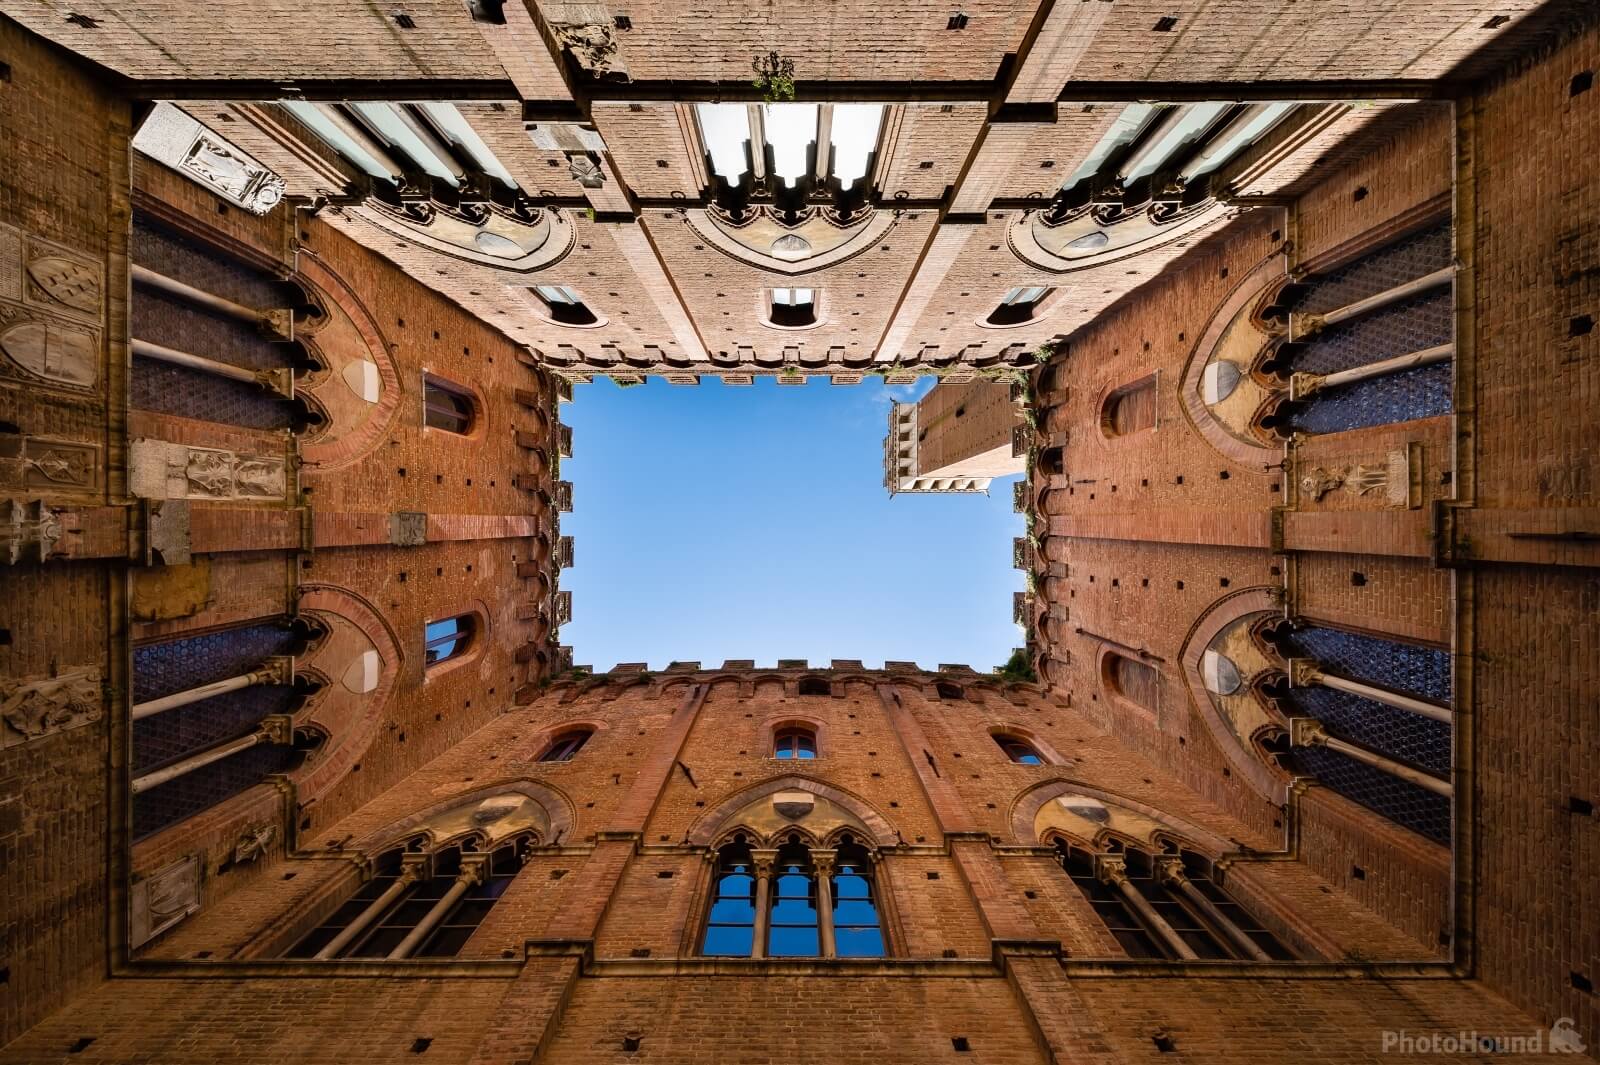 Image of Siena, Pubblico Palace (view up) by VOJTa Herout